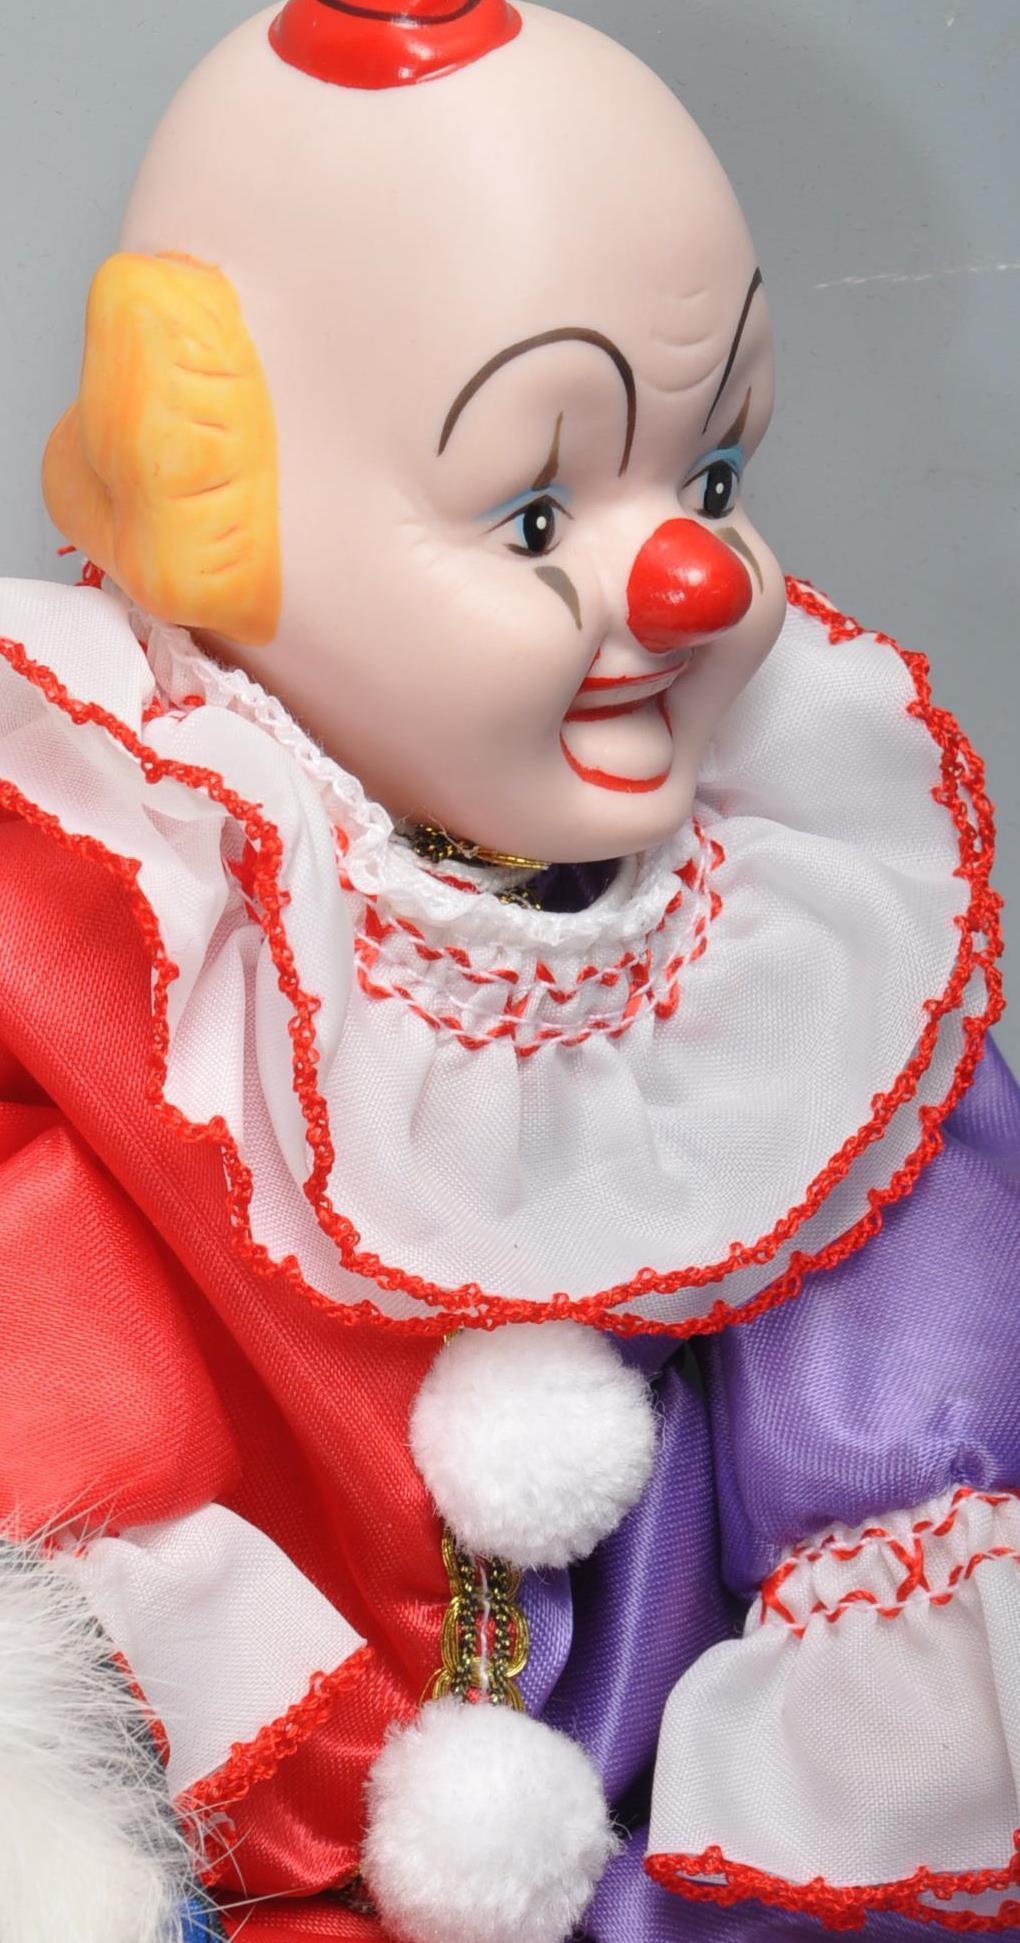 LARGE COLLECTION OF CLOWN FIGURINES WITH PORCELAIN FACES - Image 8 of 9